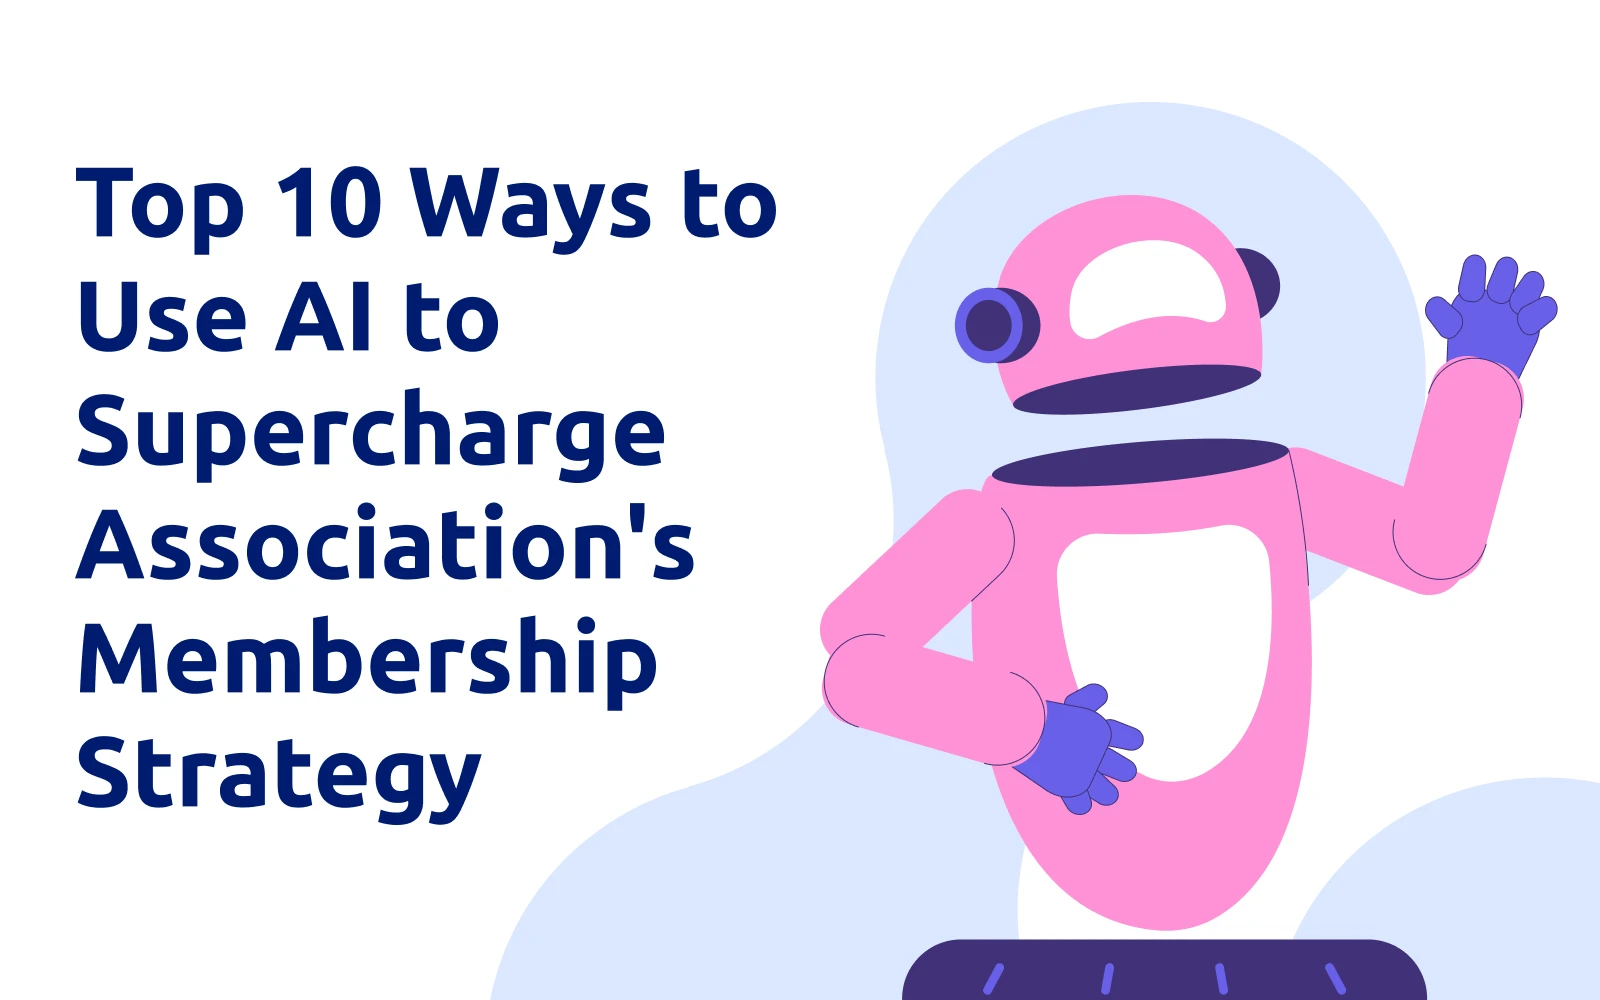 Top 10 Ways to Use AI to Supercharge Association's Membership Strategy